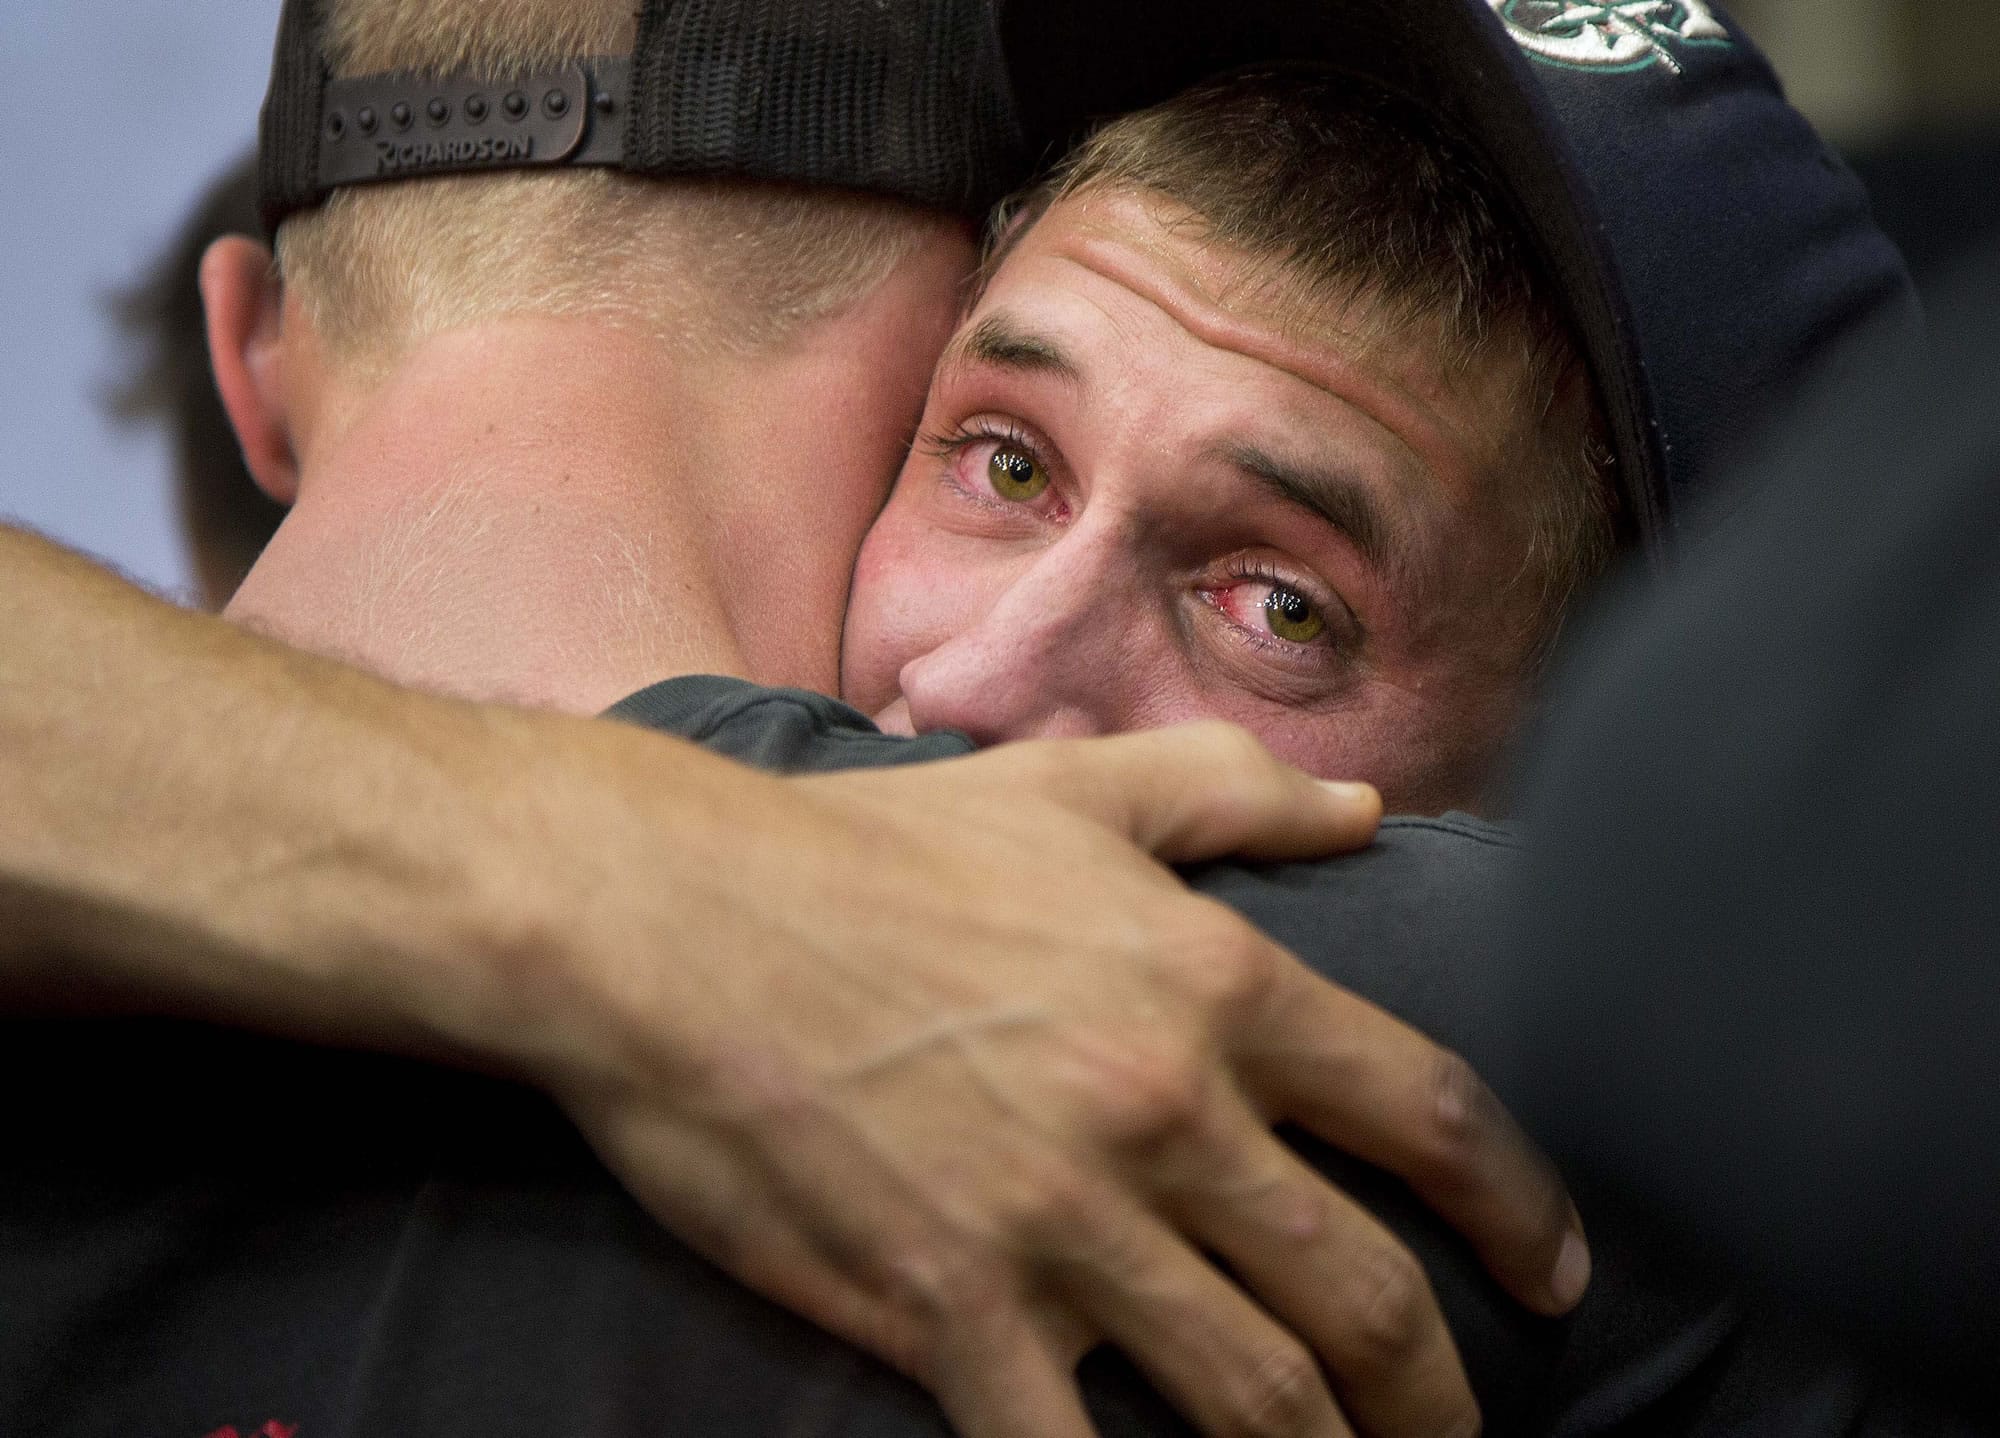 Prescott and other area department firefighters embrace during a memorial service Monday in Prescott, Ariz.